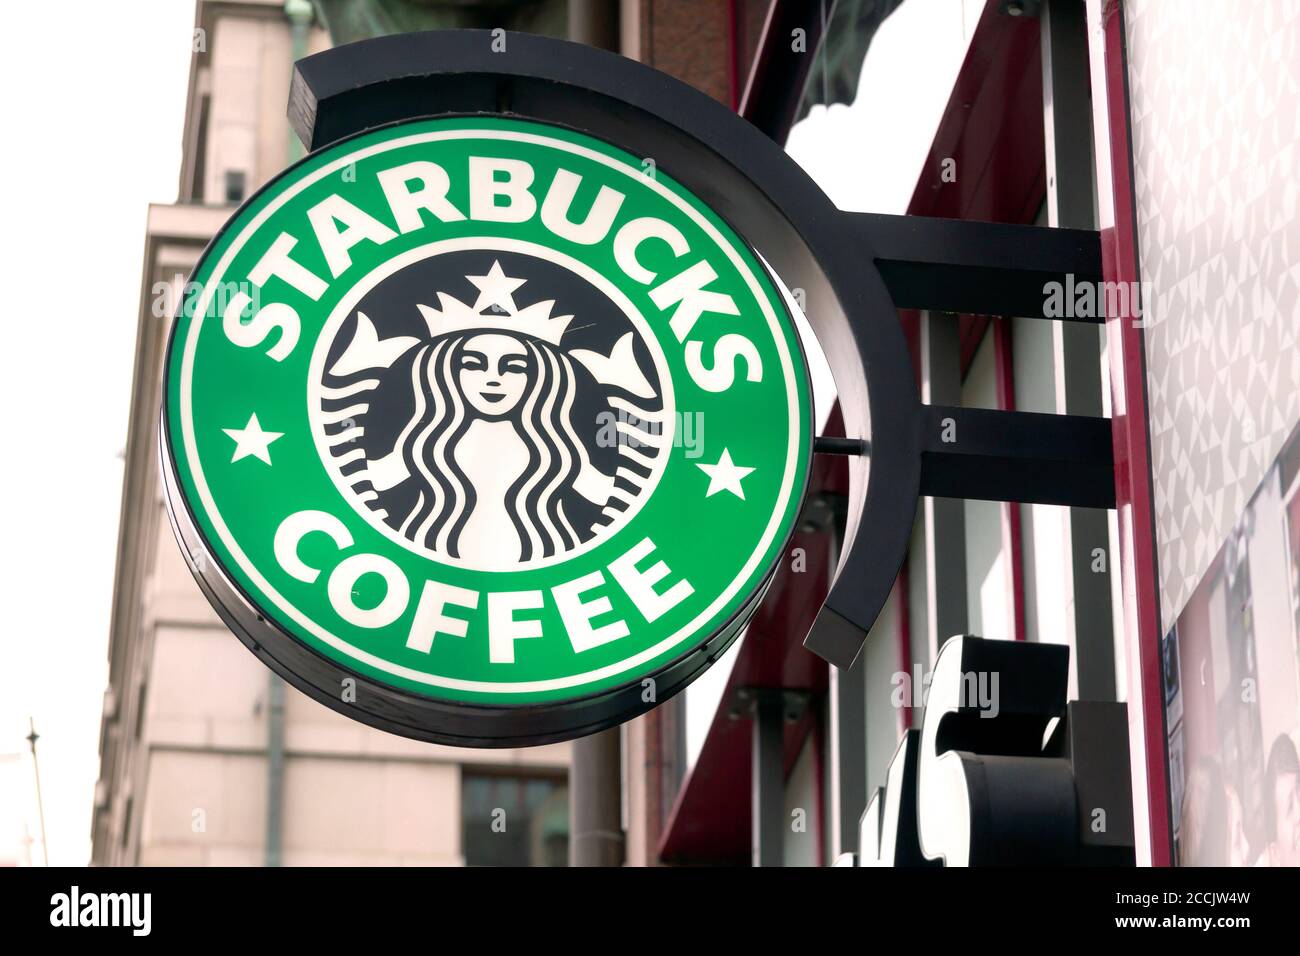 Prague, Czech Republic - December 24, 2012. Starbucks coffee logo. Starbucks Coffee is an American chain of coffee shops, founded in Seattle. Stock Photo